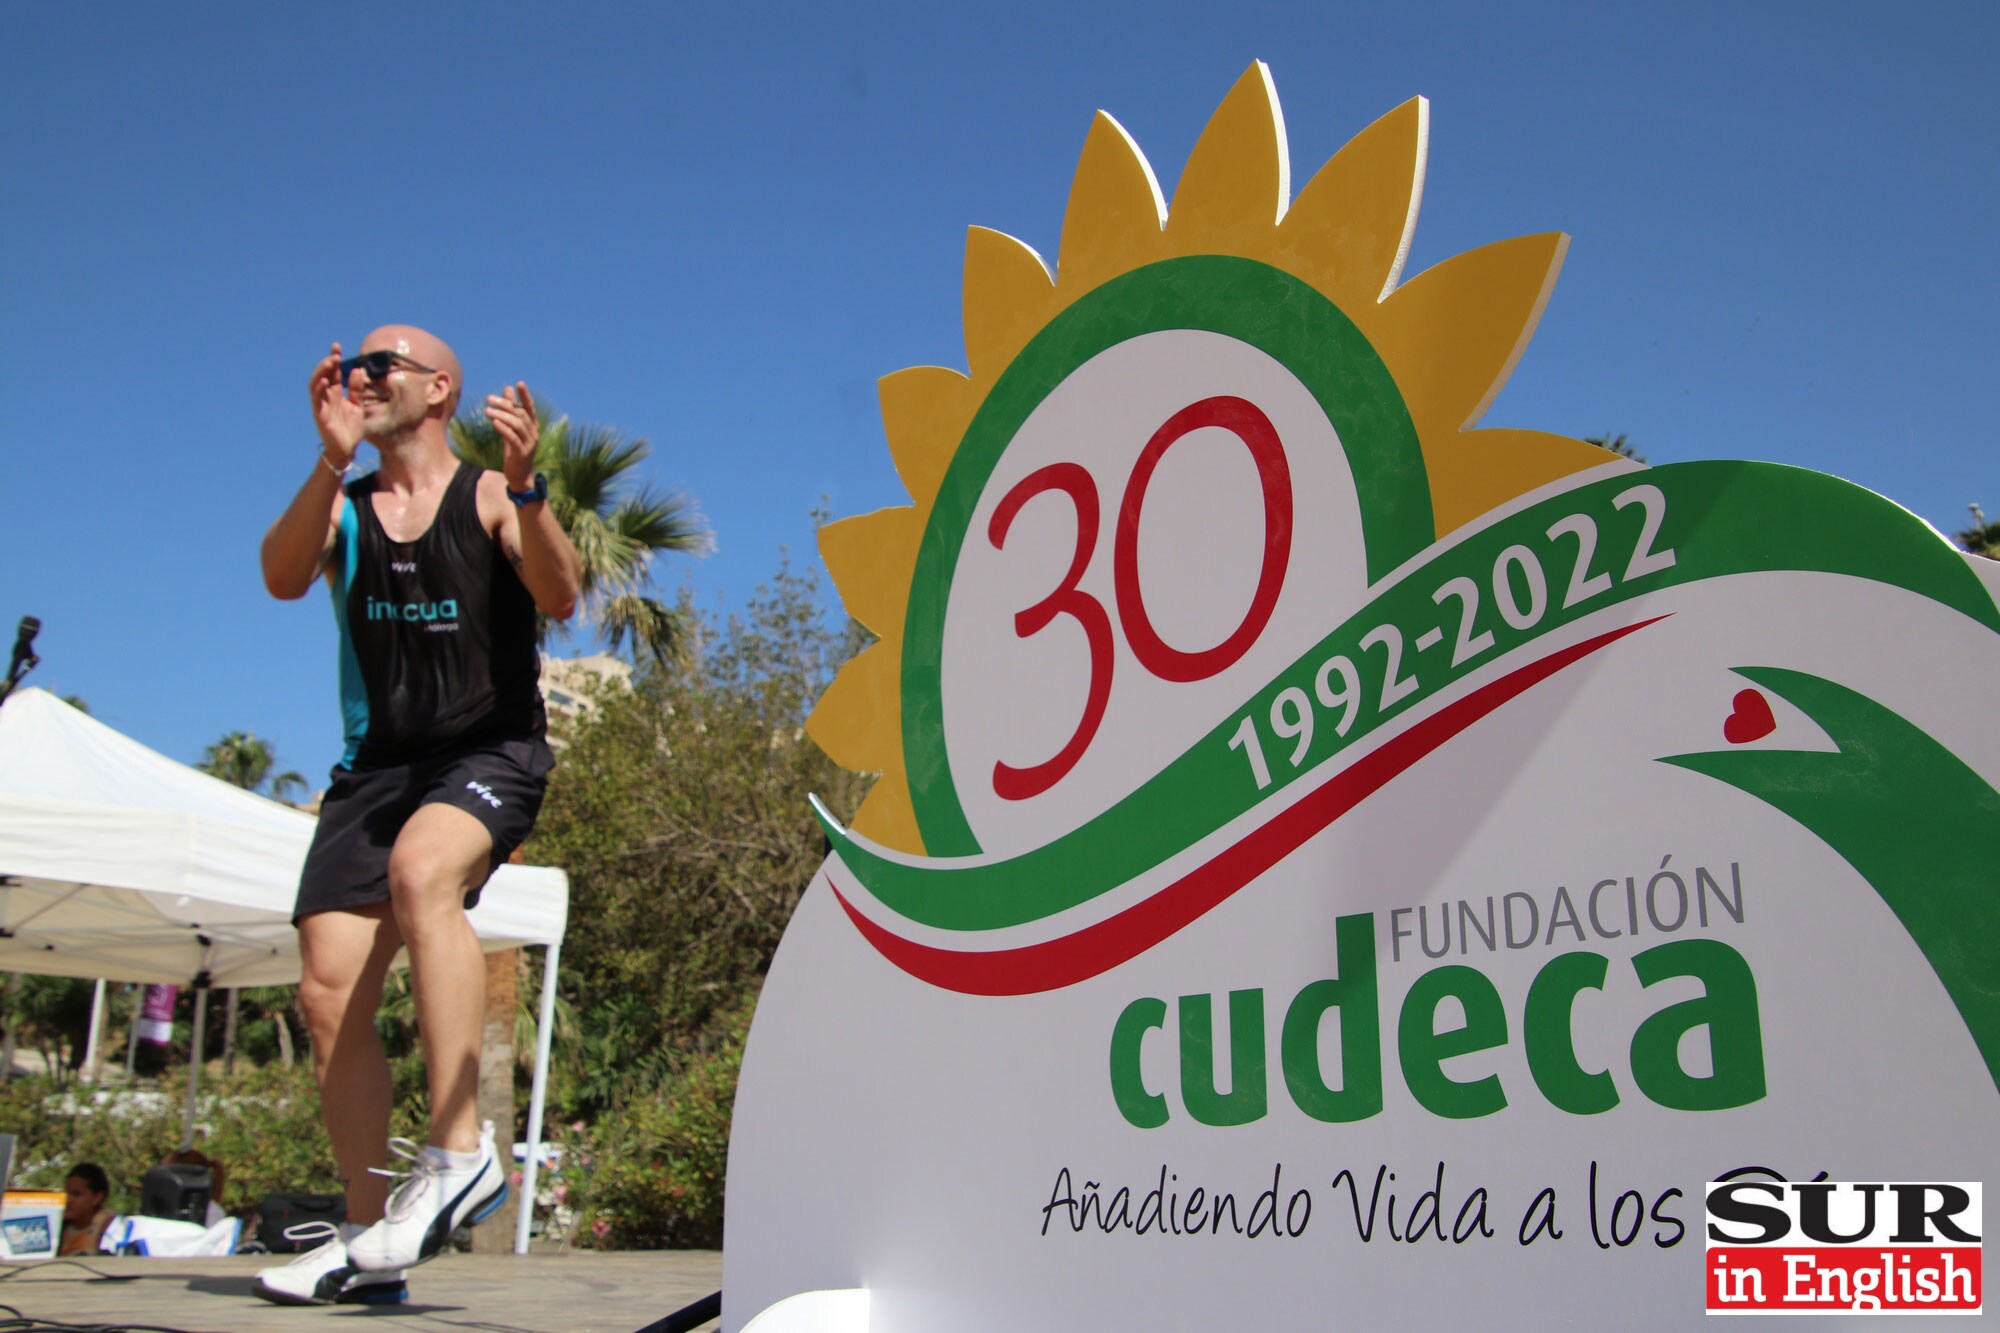 The annual fundraising initiative for the cancer care charity in Benalmádena on Saturday.